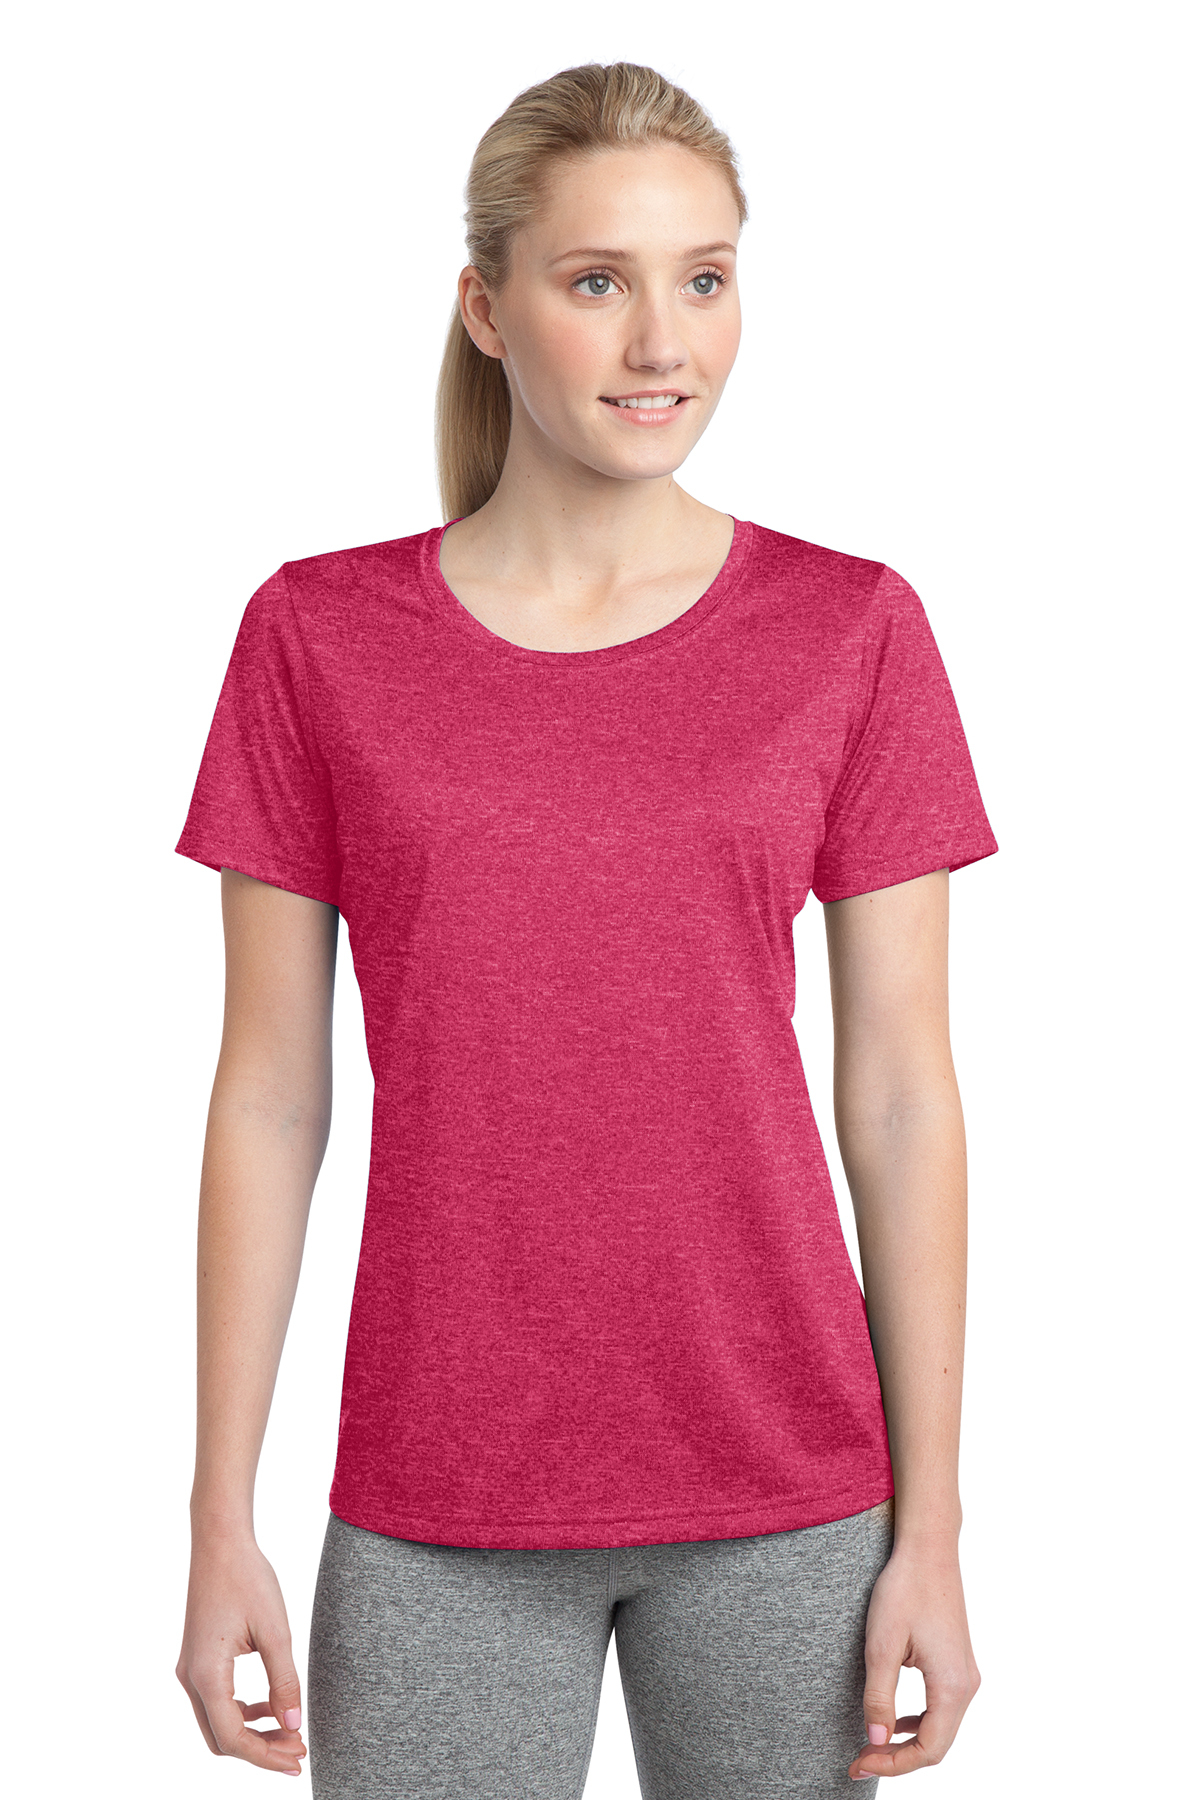 click to view Pink Raspberry Heather